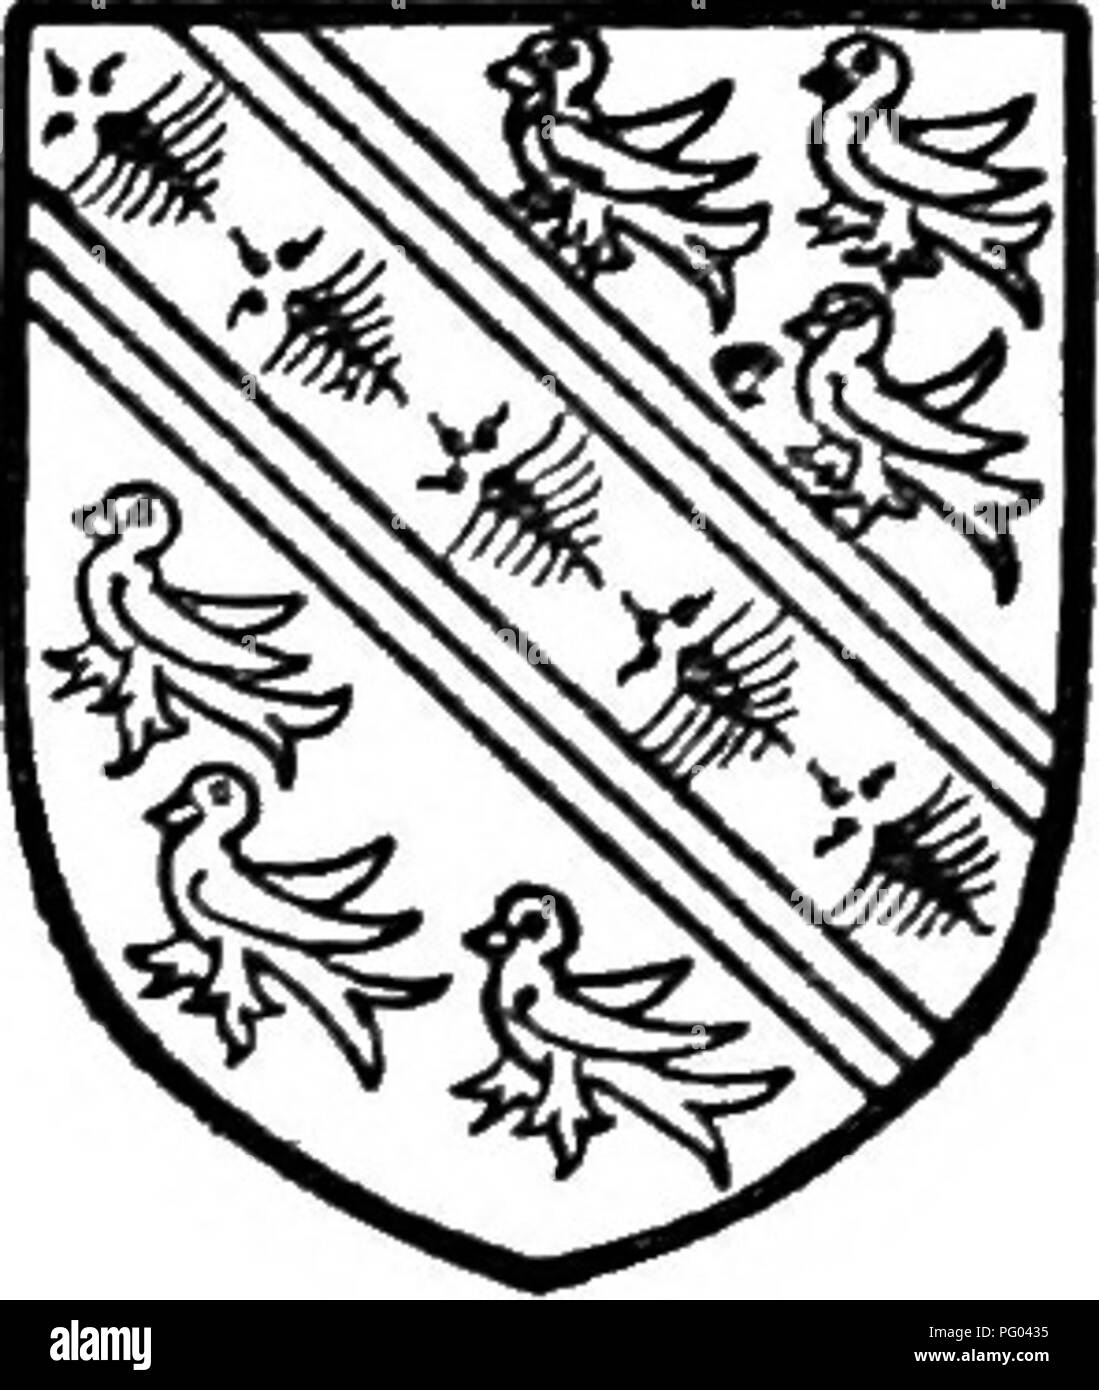 . The Victoria history of the county of Bedford. Natural history. A HISTORY OF BEDFORDSHIRE it continued to be held of them as of their manor of Dallow in Luton ; it is mentioned as so held in 1327 and again in 1531.'&quot; Subsequent to the dis- solution of the abbey it continued to be held of Dallow, the last mention of the overlordship occurring in i644.&quot;» Robert Fitz Walter, to whom Biscott manor thus passed, was one of the twenty-iive barons appointed to enforce the fulfilment of Magna Charta. He was outlawed and temporarily deprived of his possessions on two occasions—in 1212 and ag Stock Photo